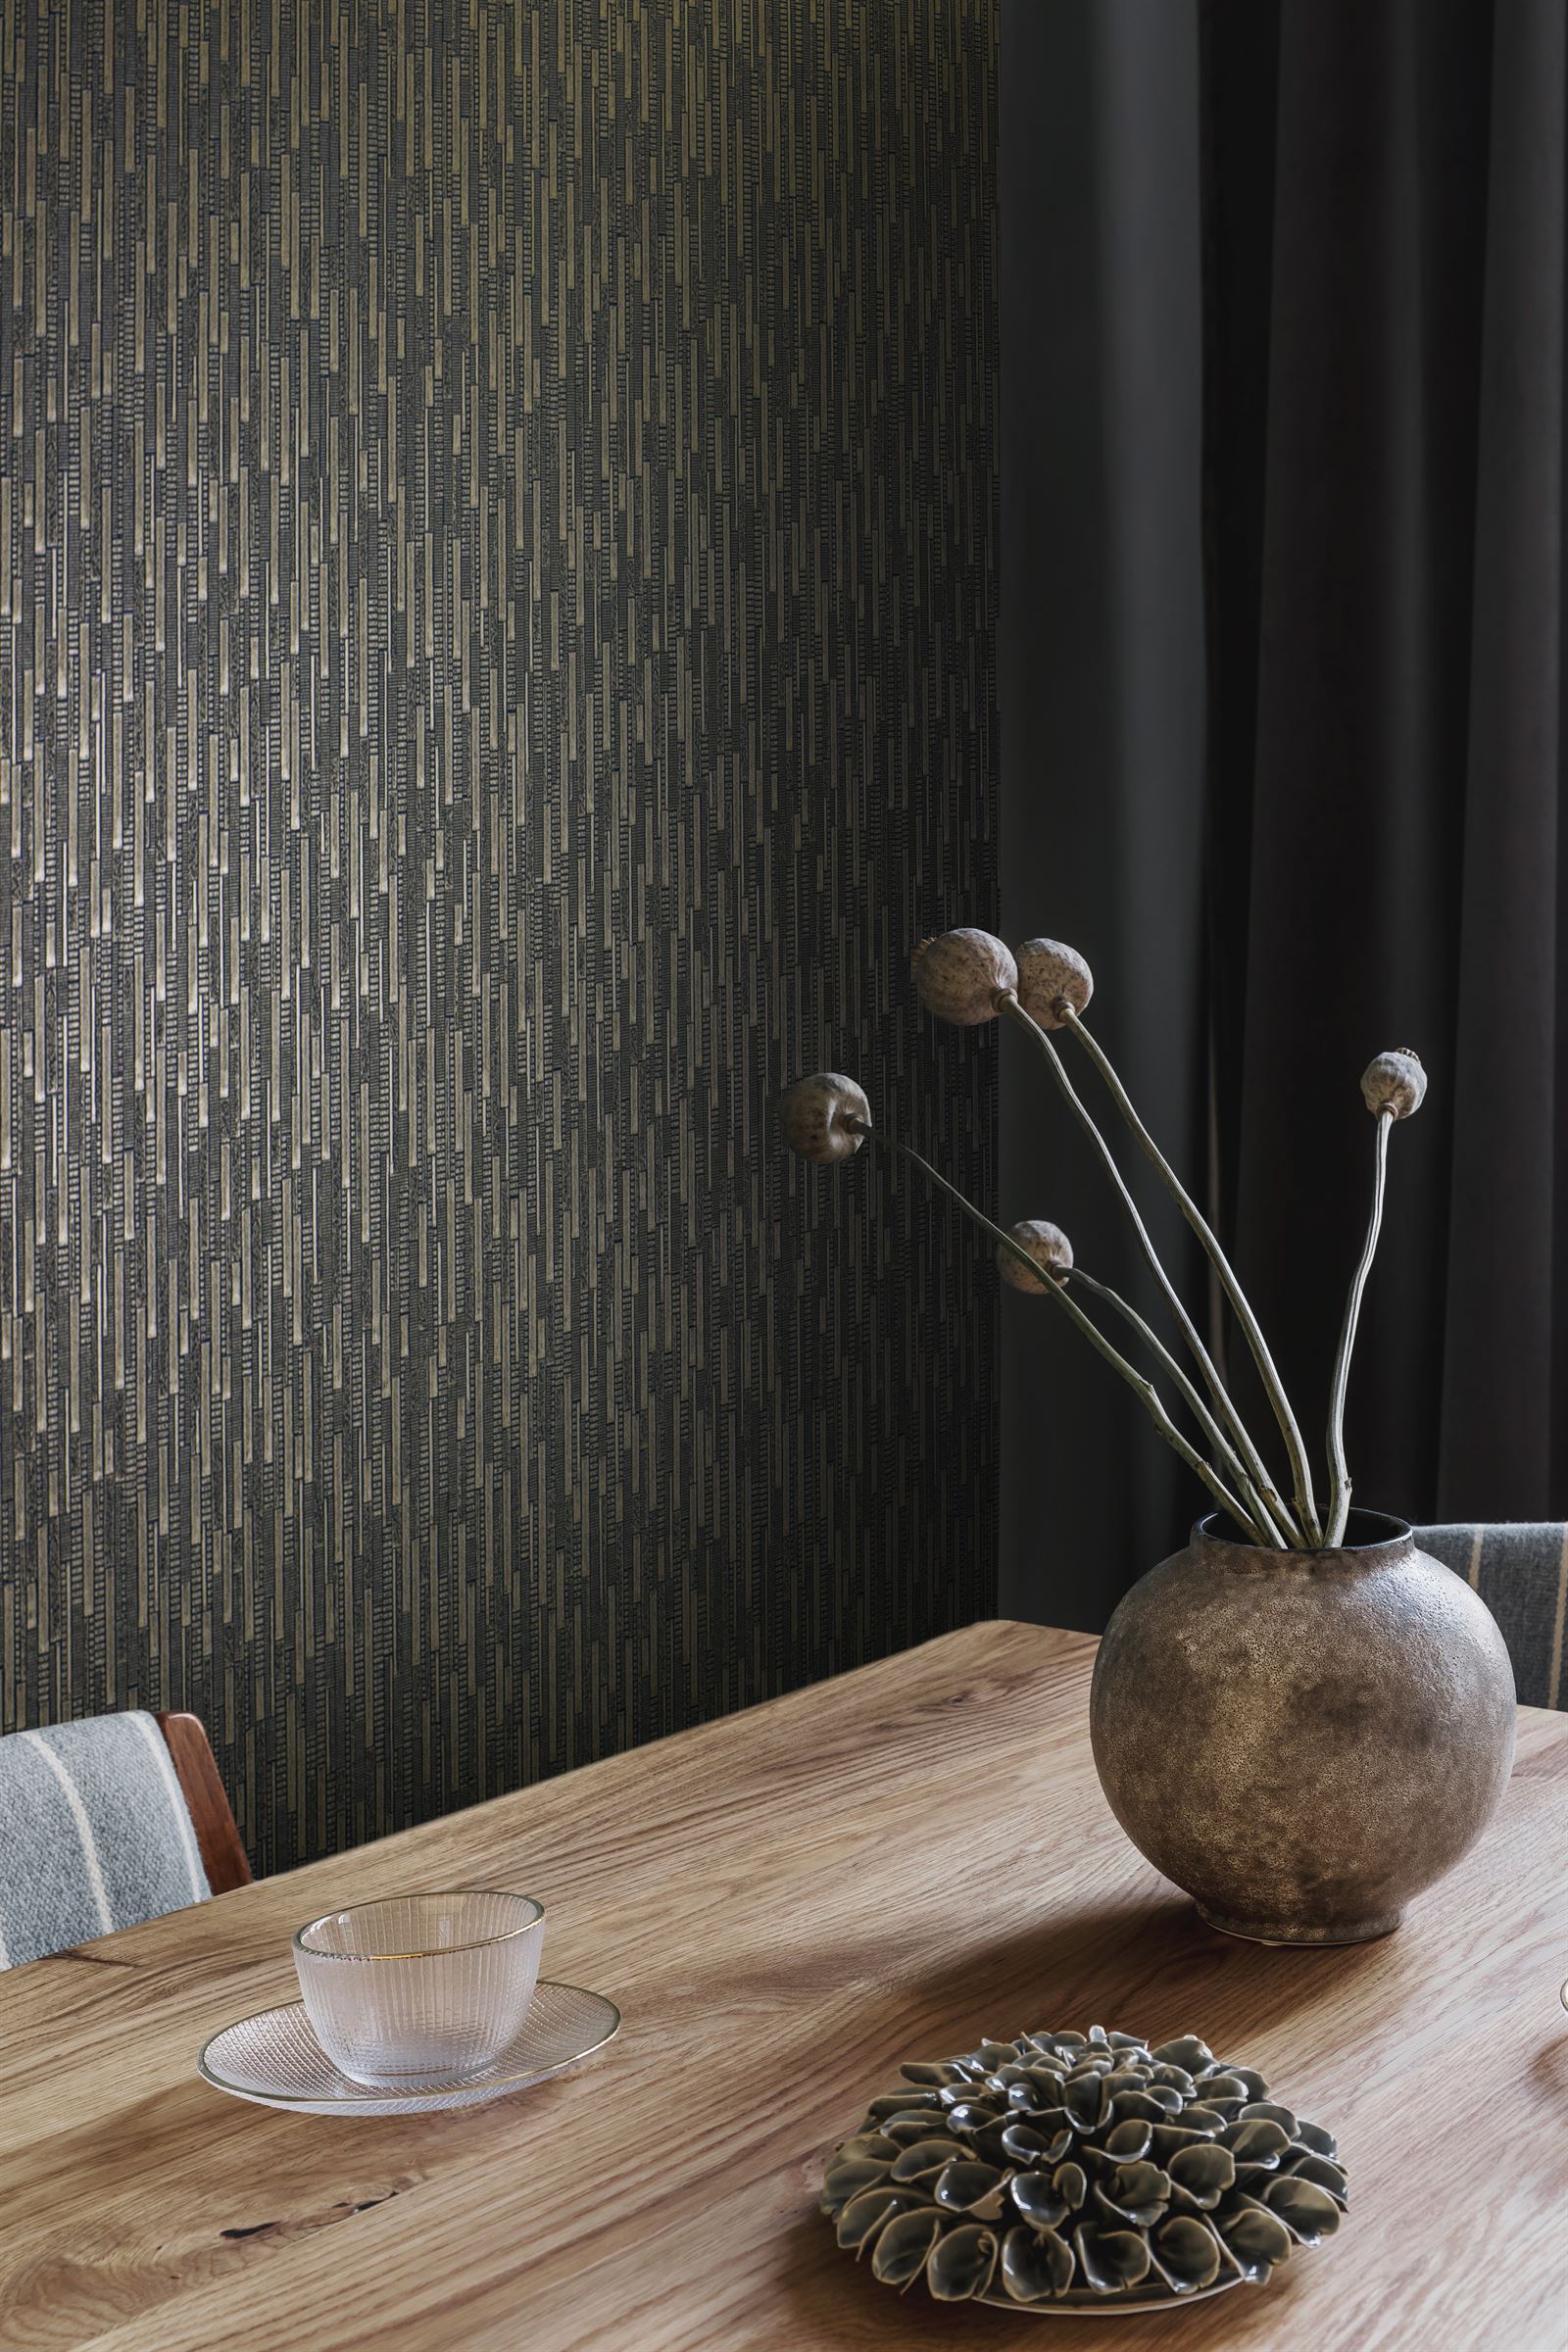 metallic wallcovering with deeply textured vertical stacked blocks which catch the light from every angle in a hotel interior